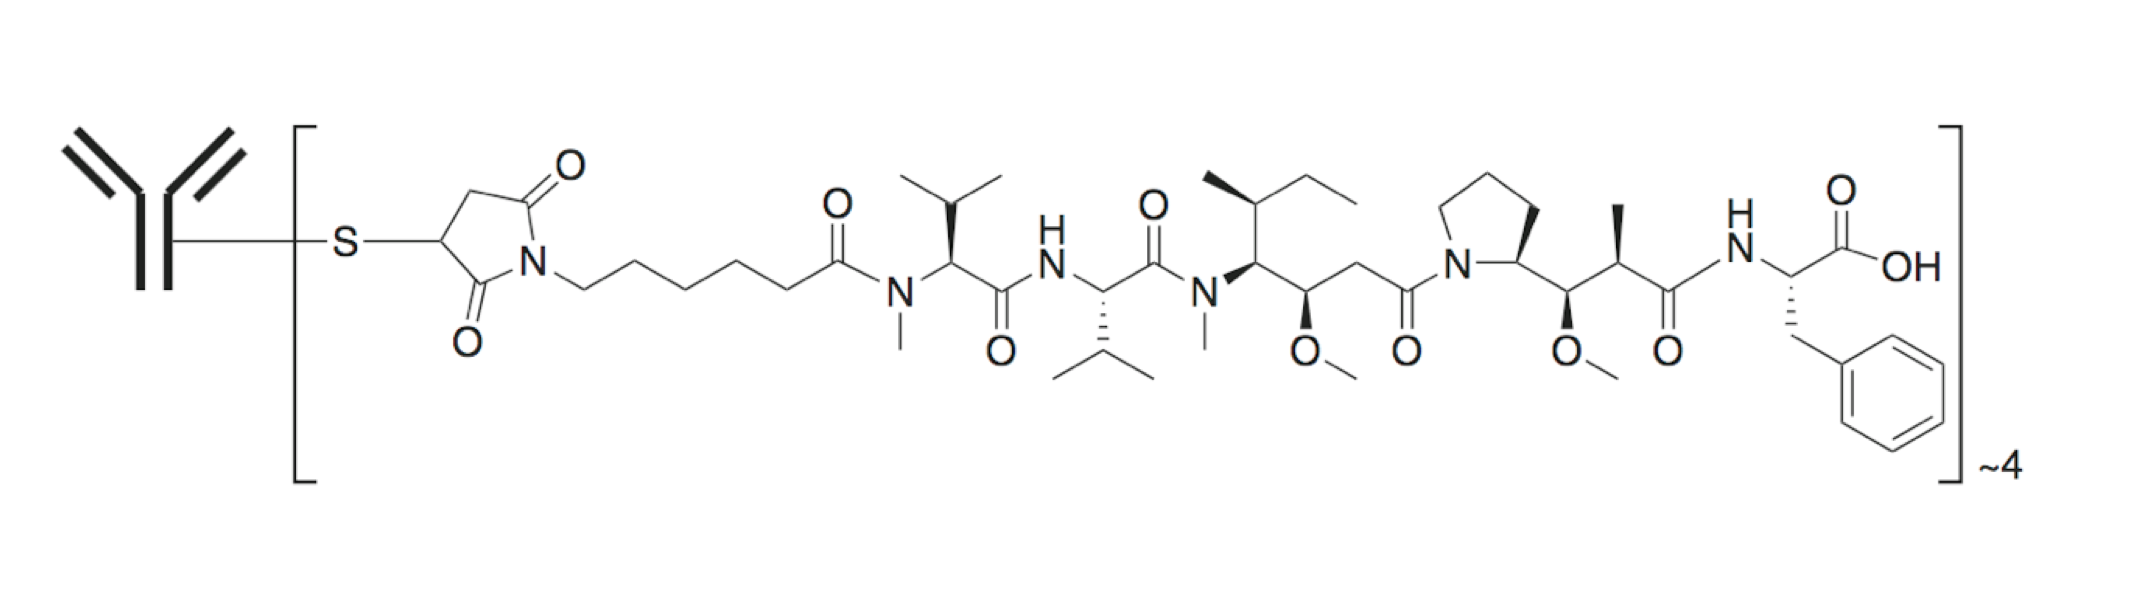 An example of an ADC prepared via the conjugation of auristatin MMAF to the antibody via a non-cleavable maleimidoca-proyl (MC) linker (Methods. Mol. Biol., 2013).